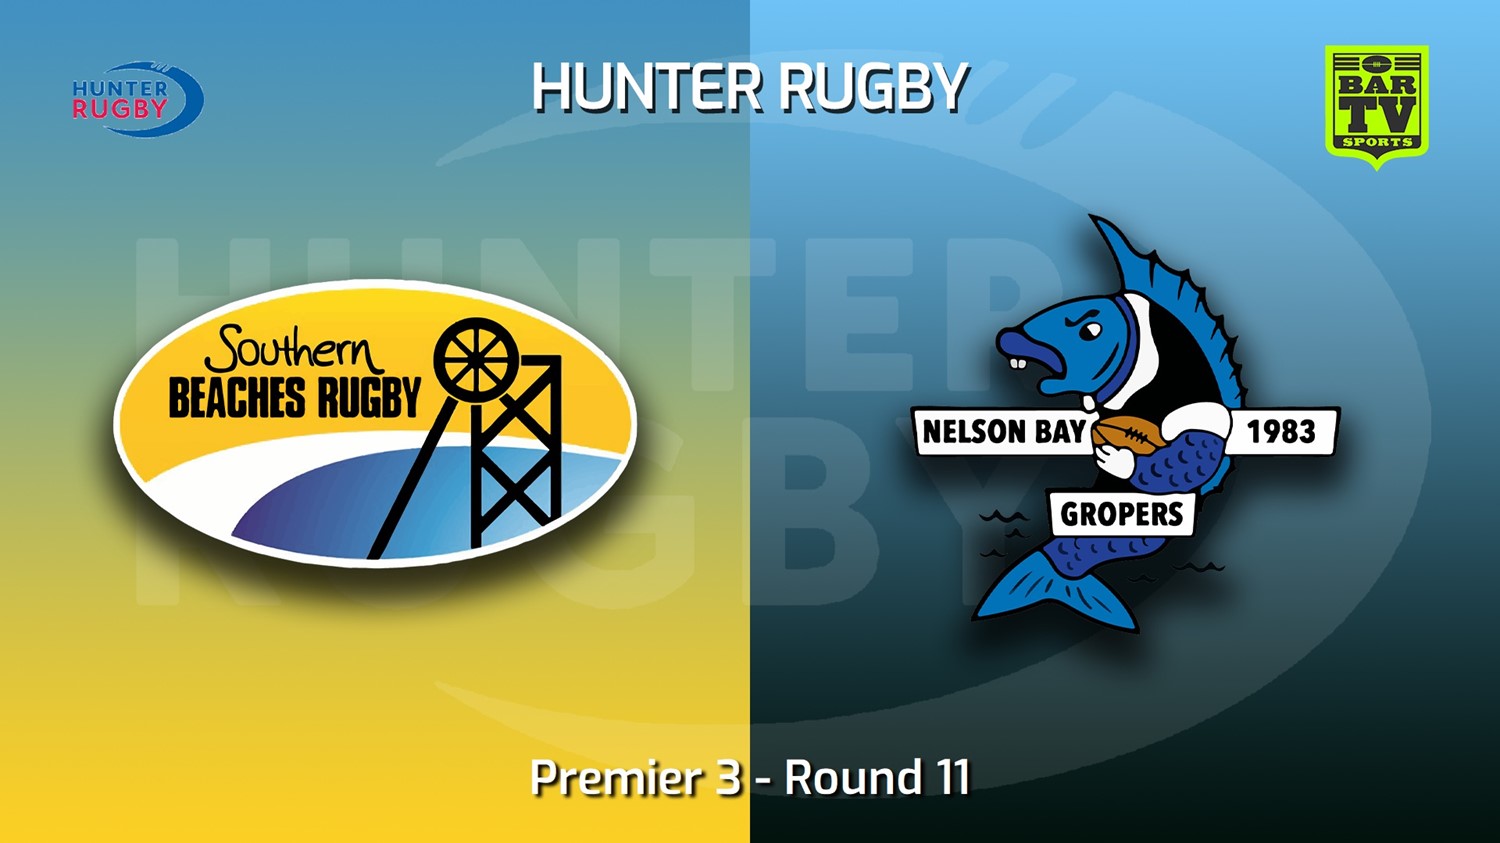 220809-Hunter Rugby Round 11 - Premier 3 - Southern Beaches v Nelson Bay Gropers Slate Image